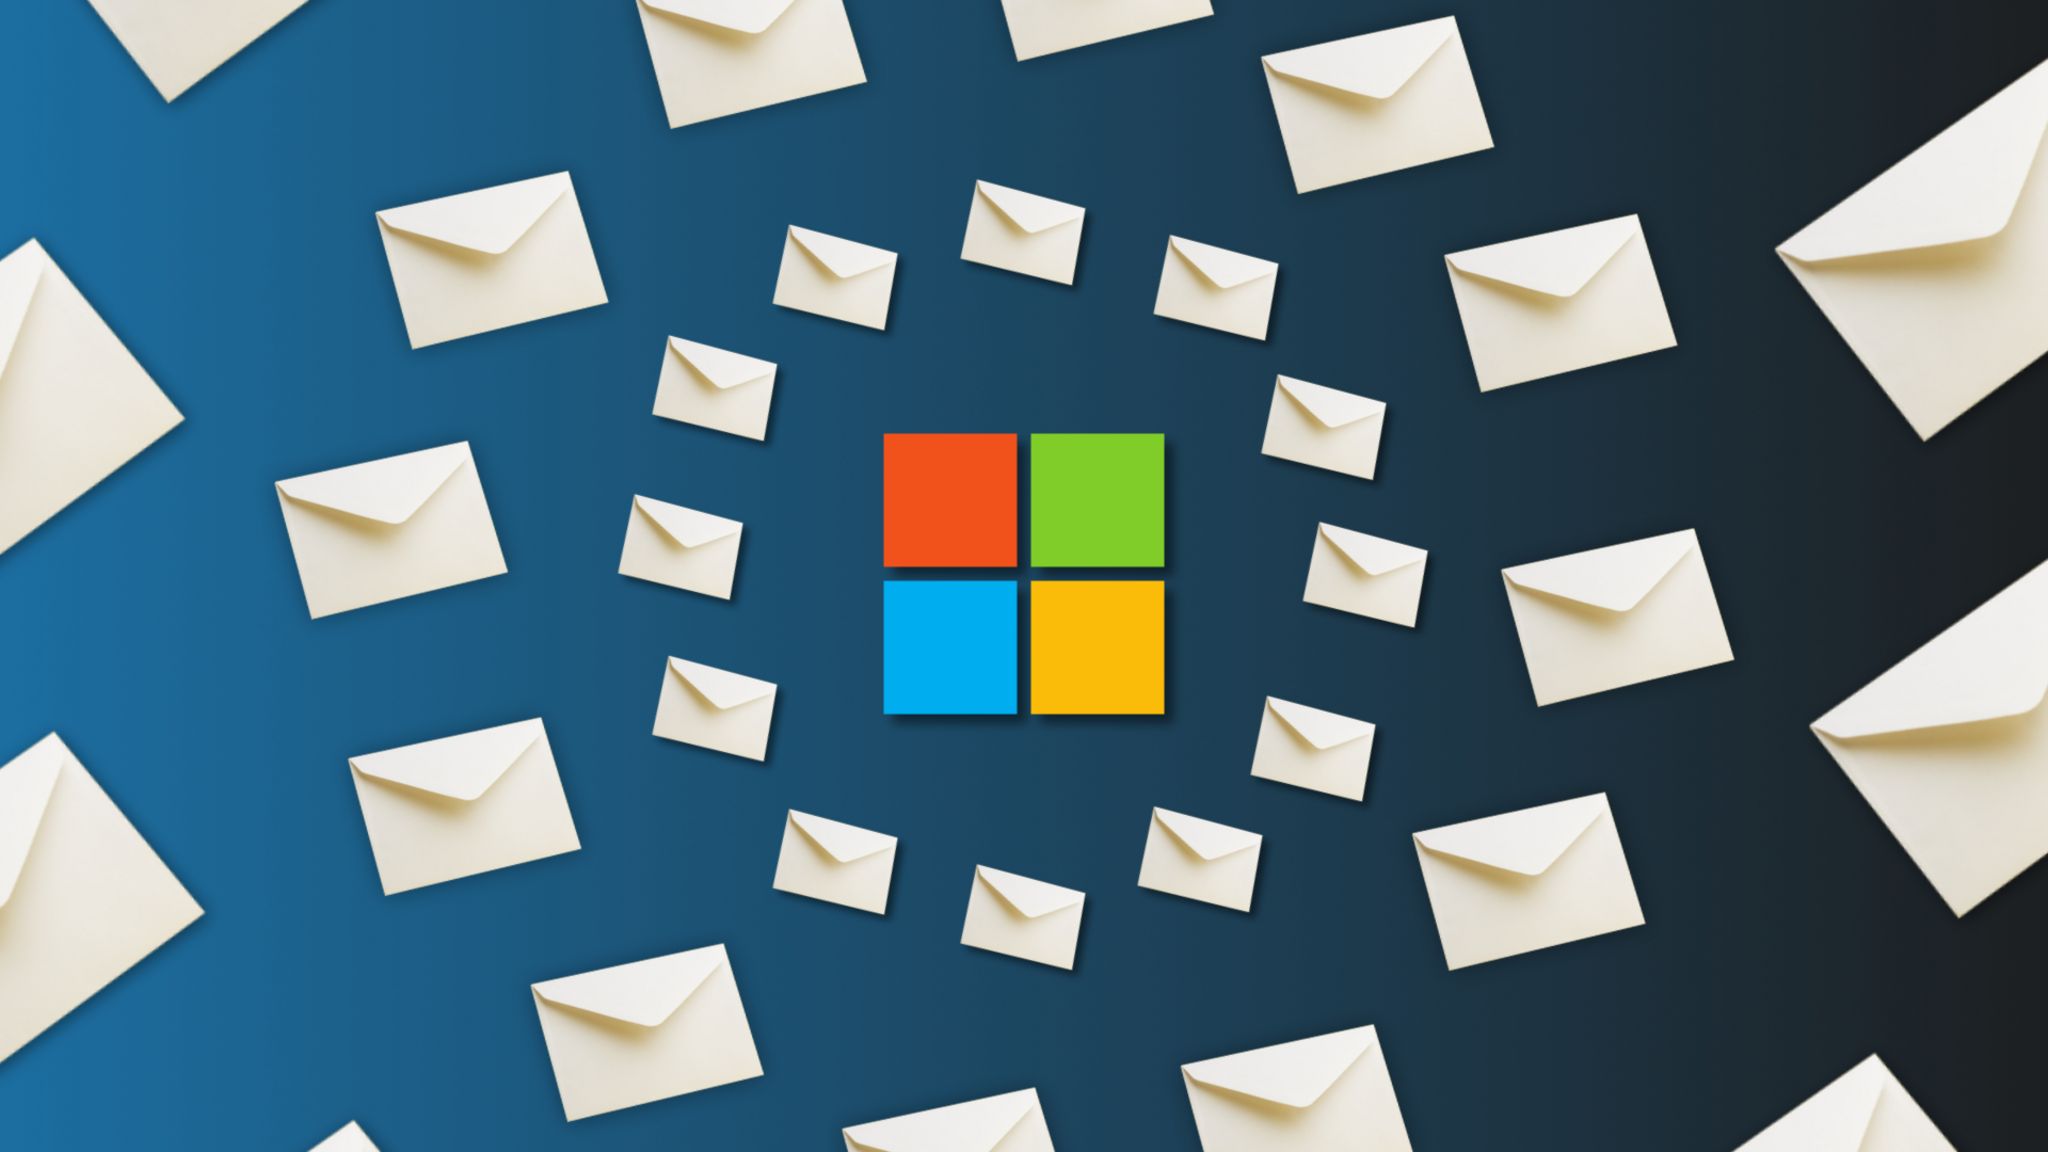 Microsoft logo surrounded by emails